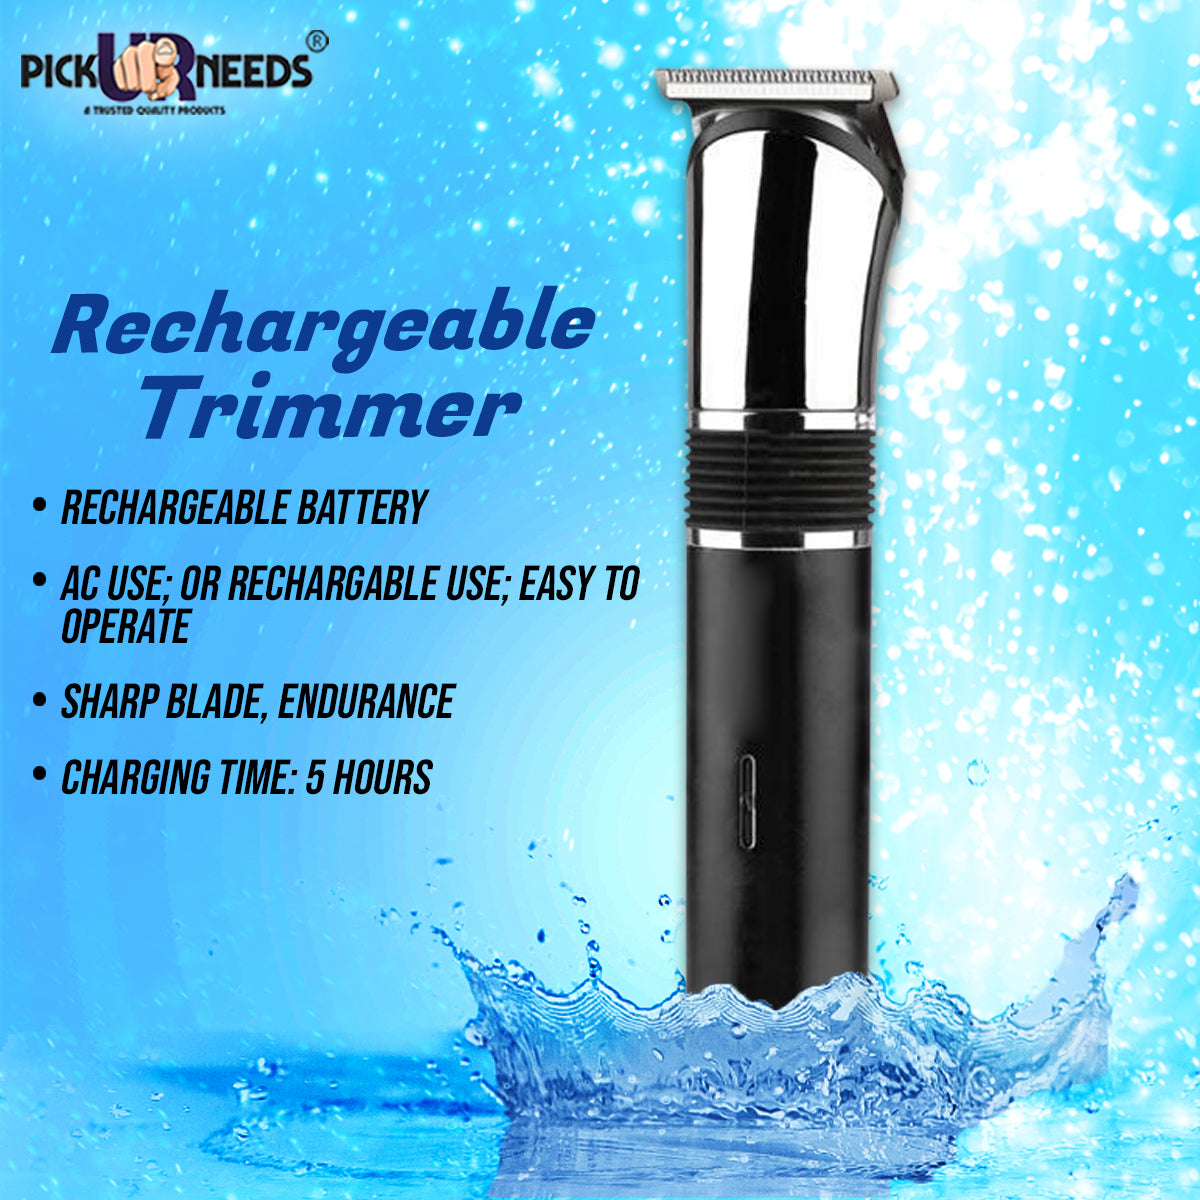 Pick Ur Needs Professional Hair Clipper Unique Switching Mode Rechargeable With Durable Battery Runtime: 90 min Trimmer for Men